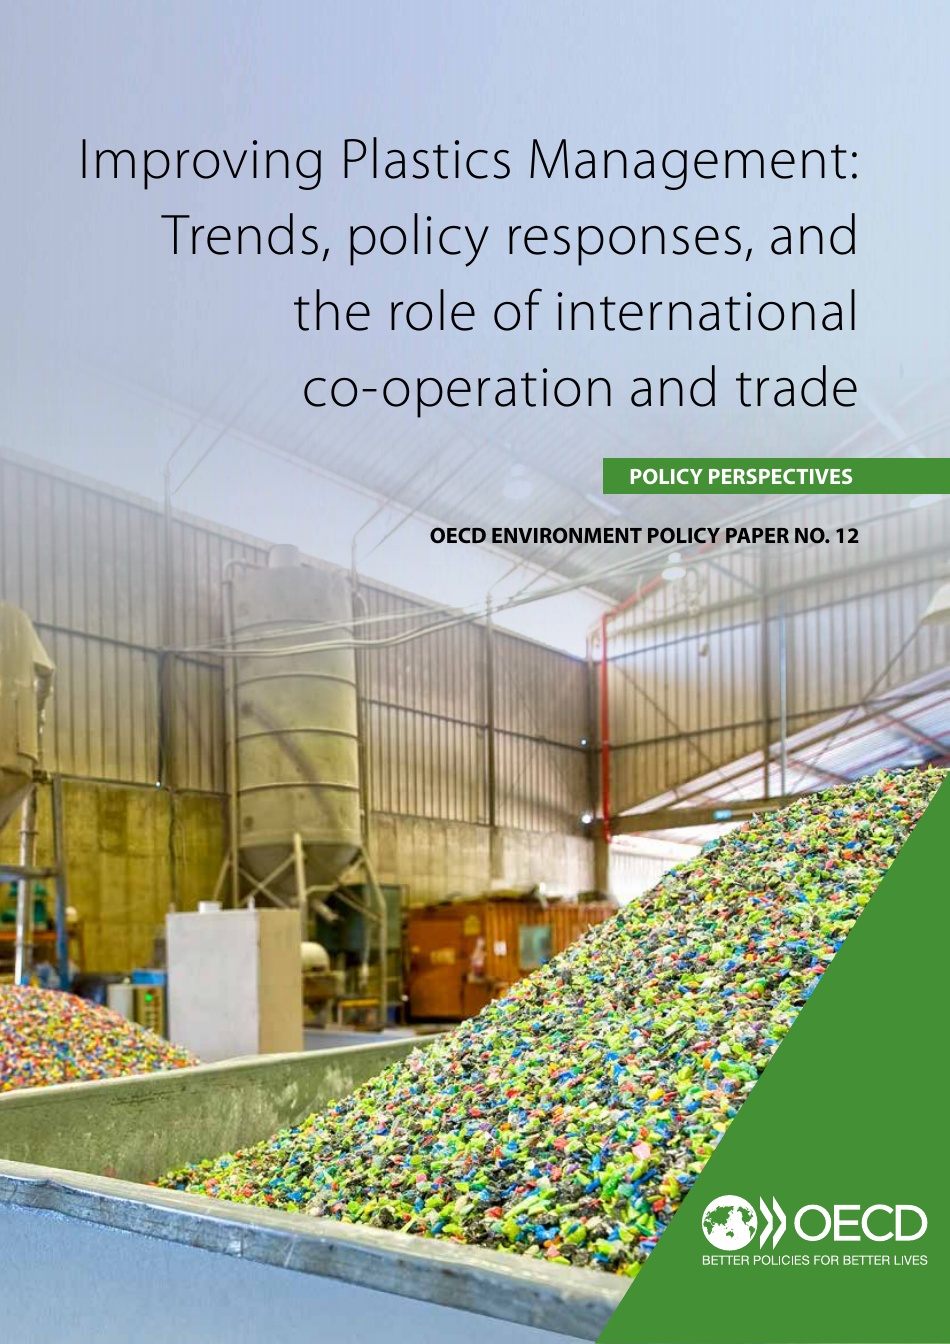 Improving Plastics Management: Trends, Policy Responses, and the Role of International Co-operation and Trade - Oecd Environment Policy Paper No. 12, Page 1